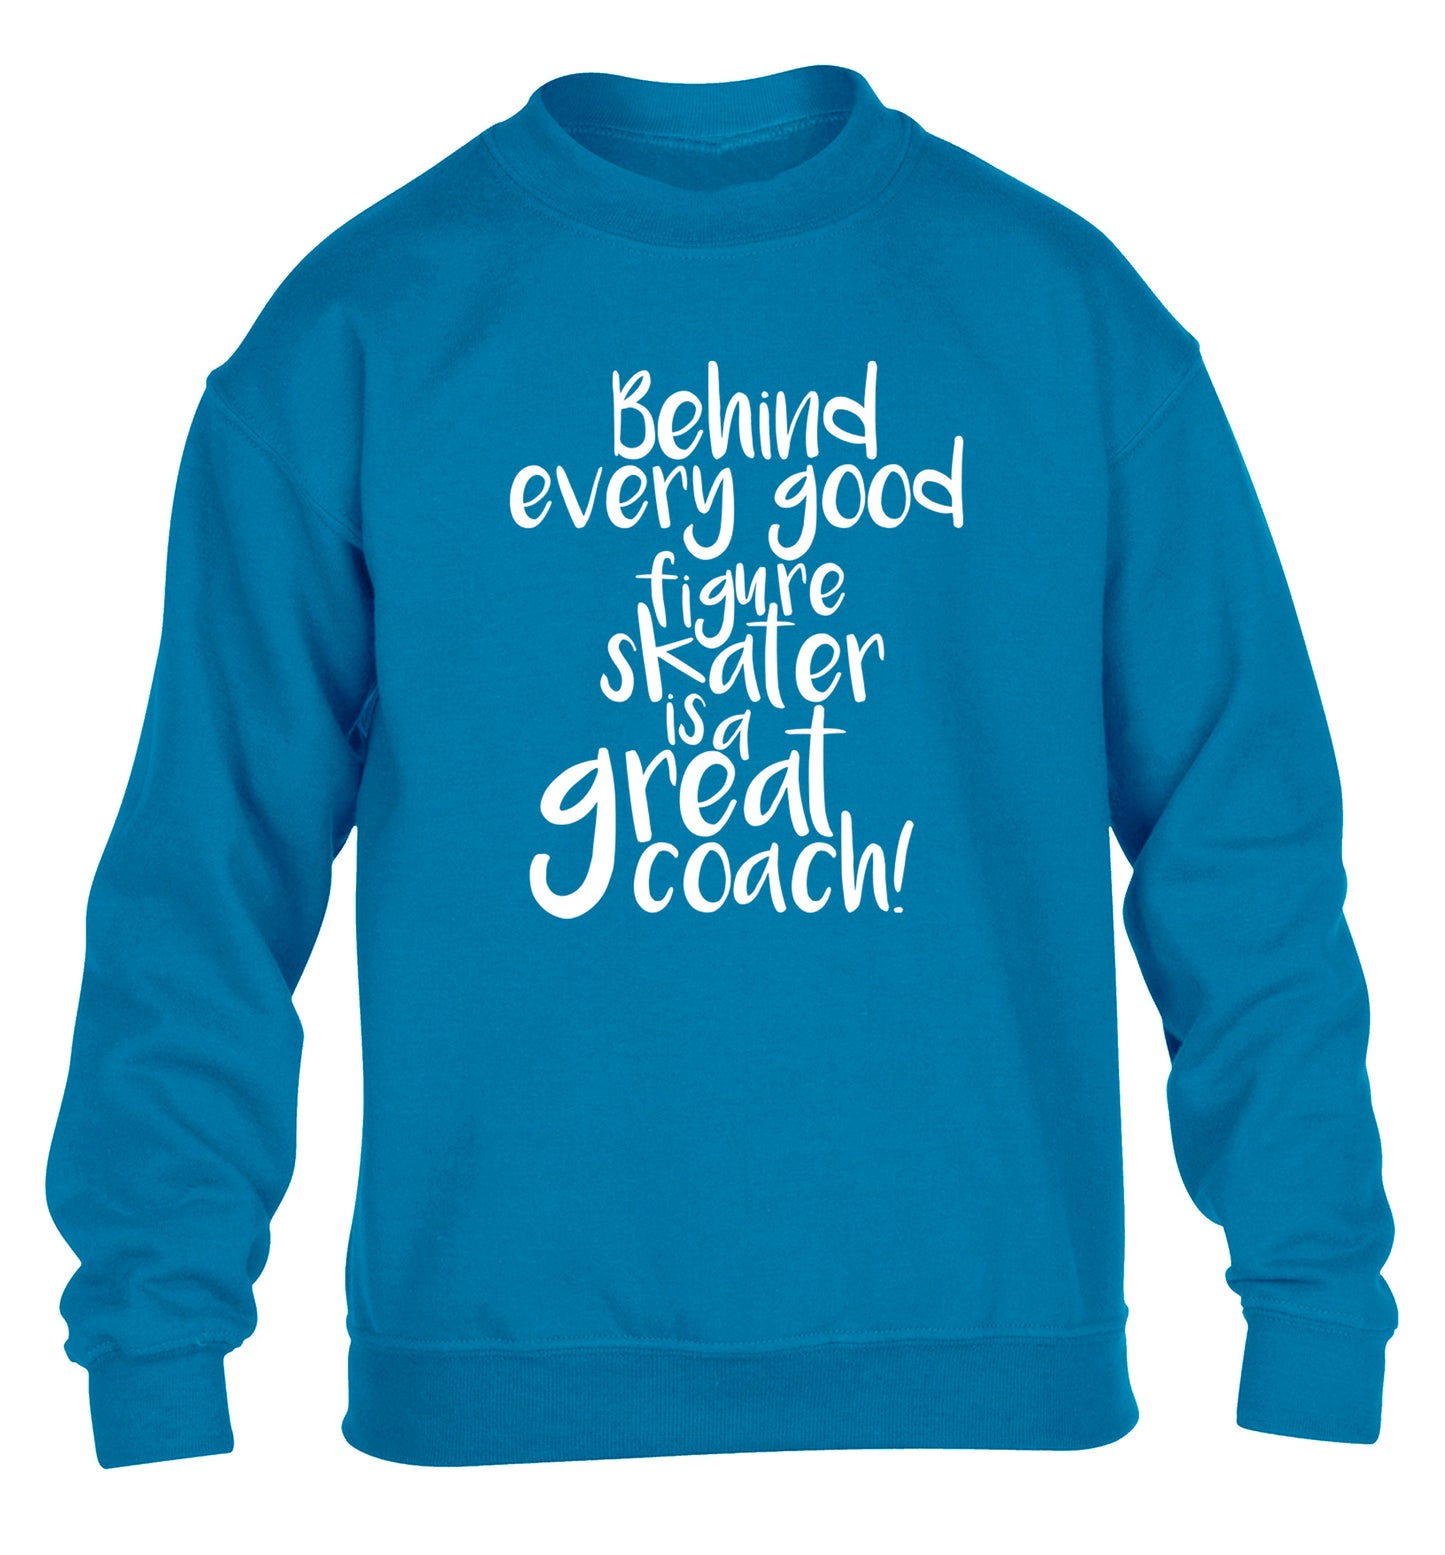 Behind every good figure skater is a great coach children's blue sweater 12-14 Years